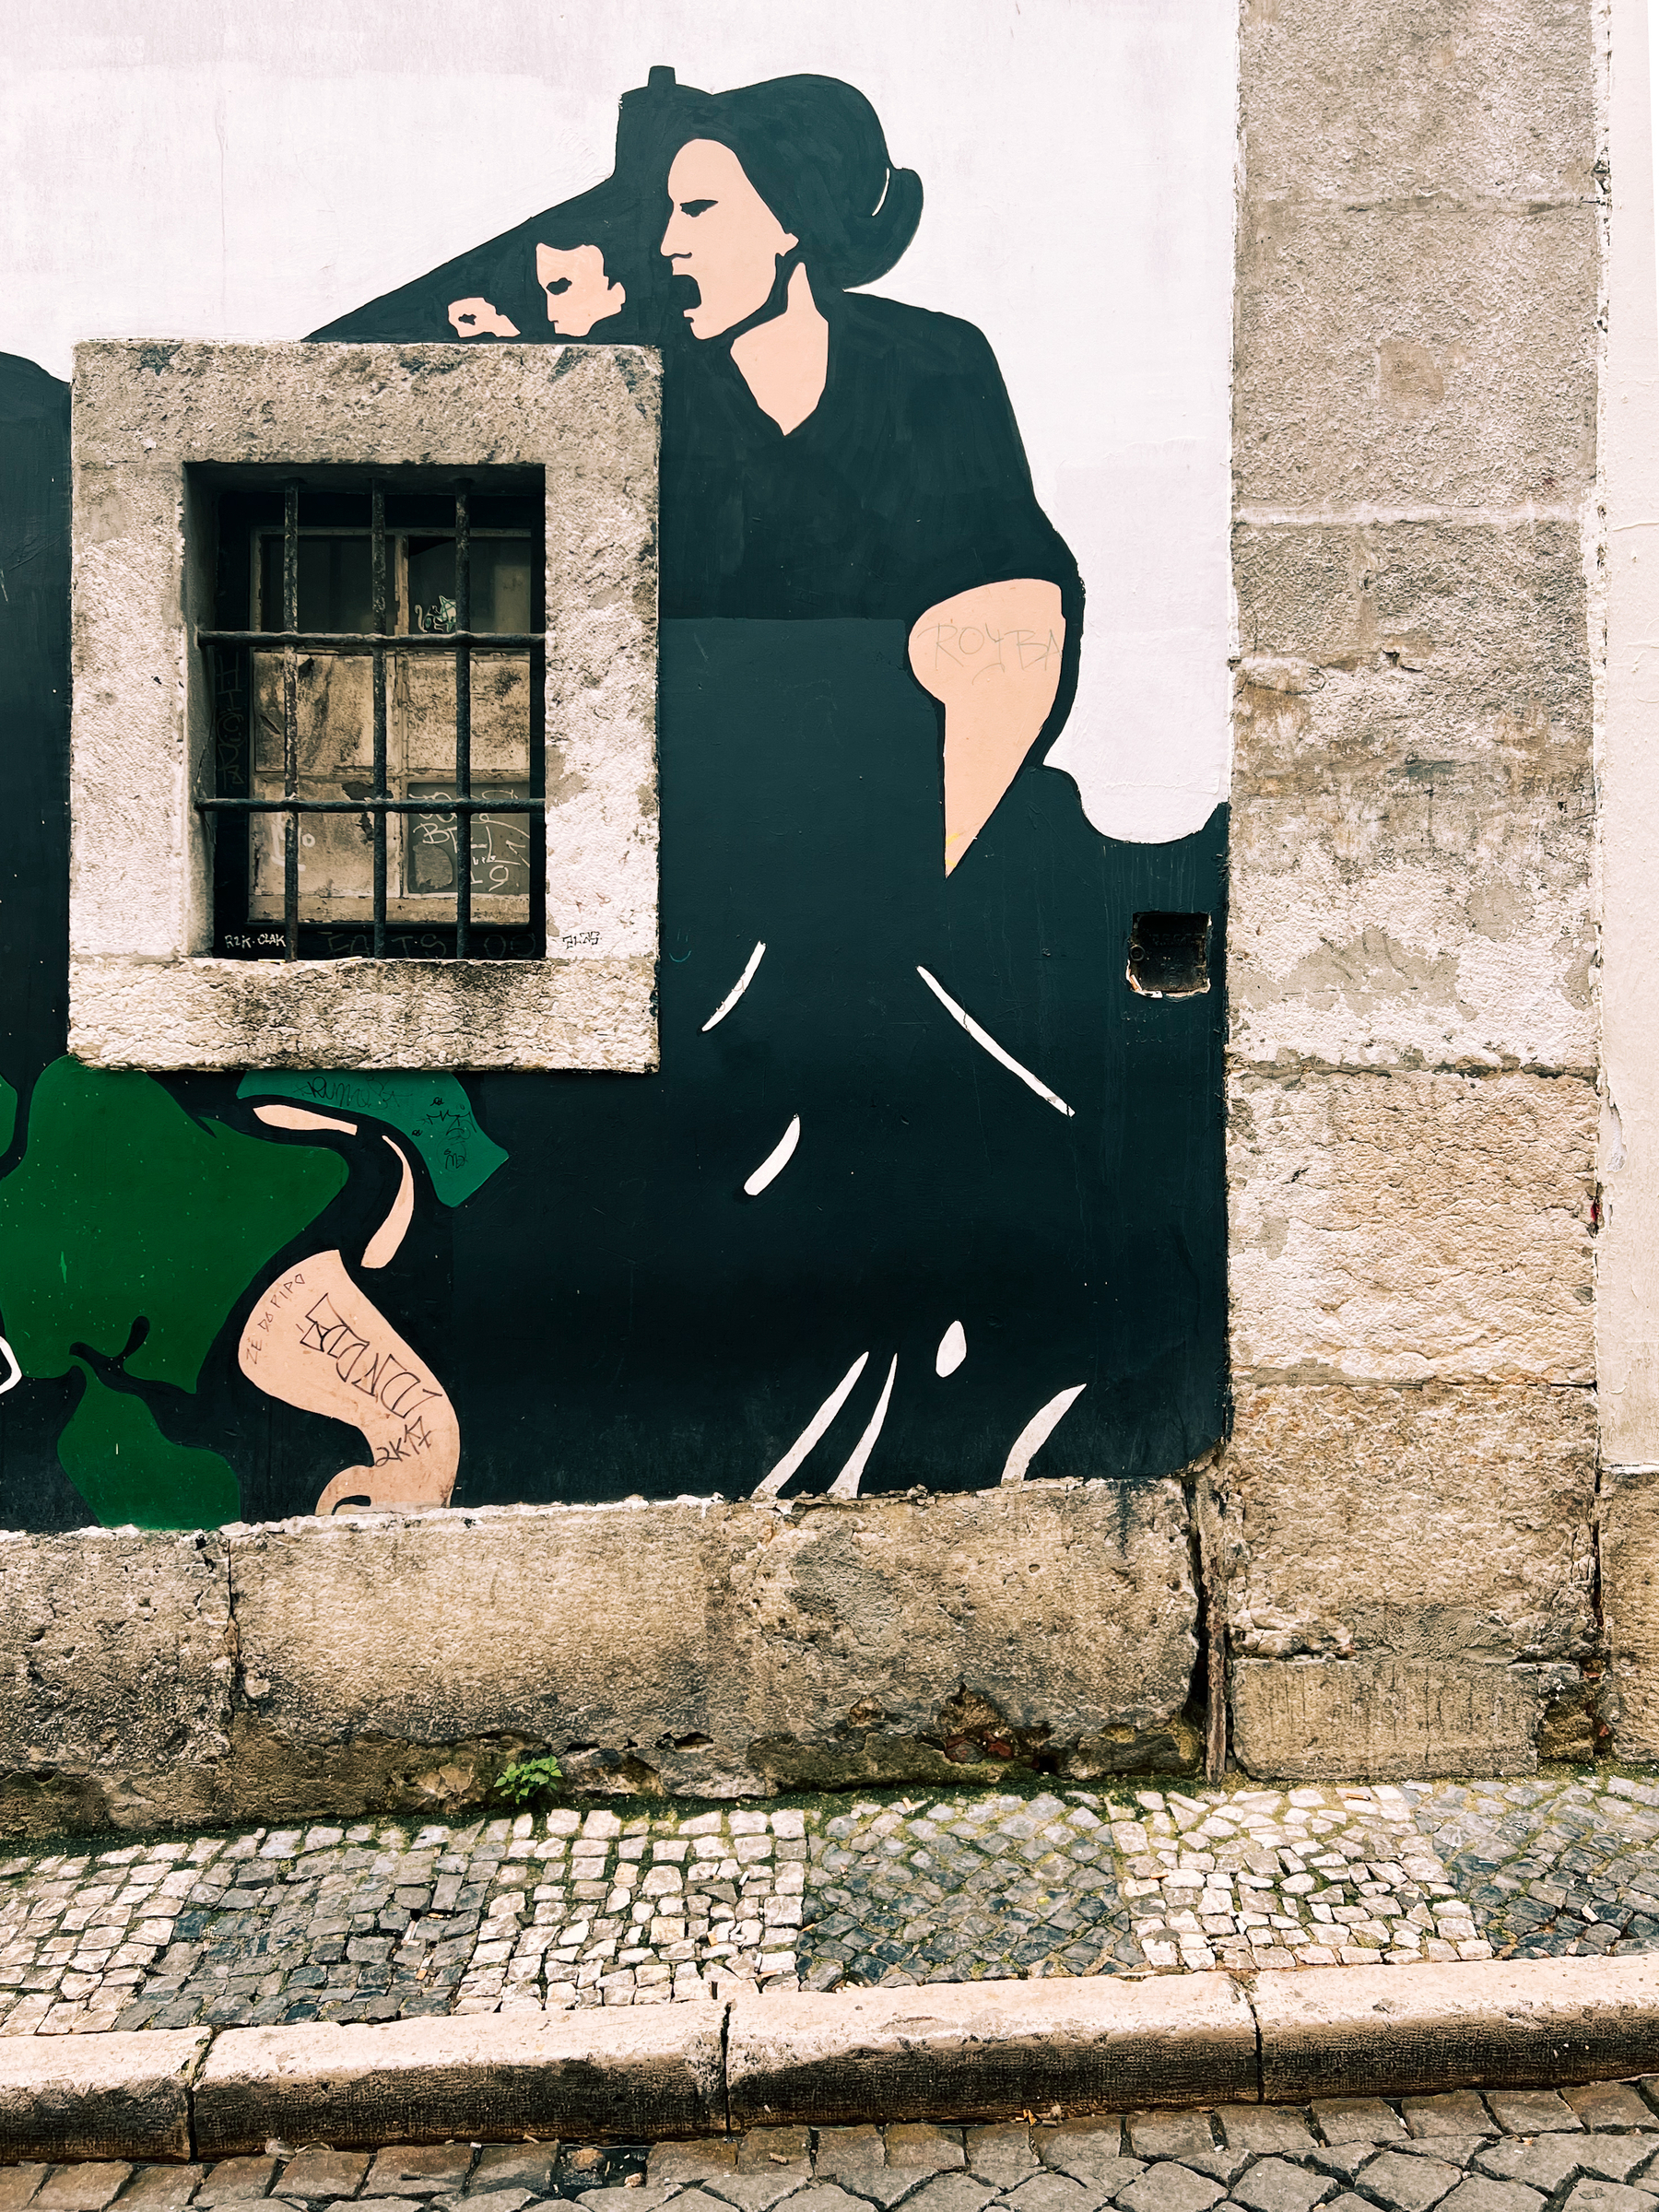 A mural on a building wall featuring a stylized black and white figure of a woman, integrated with a real window that acts as part of the art piece. The cobblestone pavement and step in front of the wall add texture to the scene.